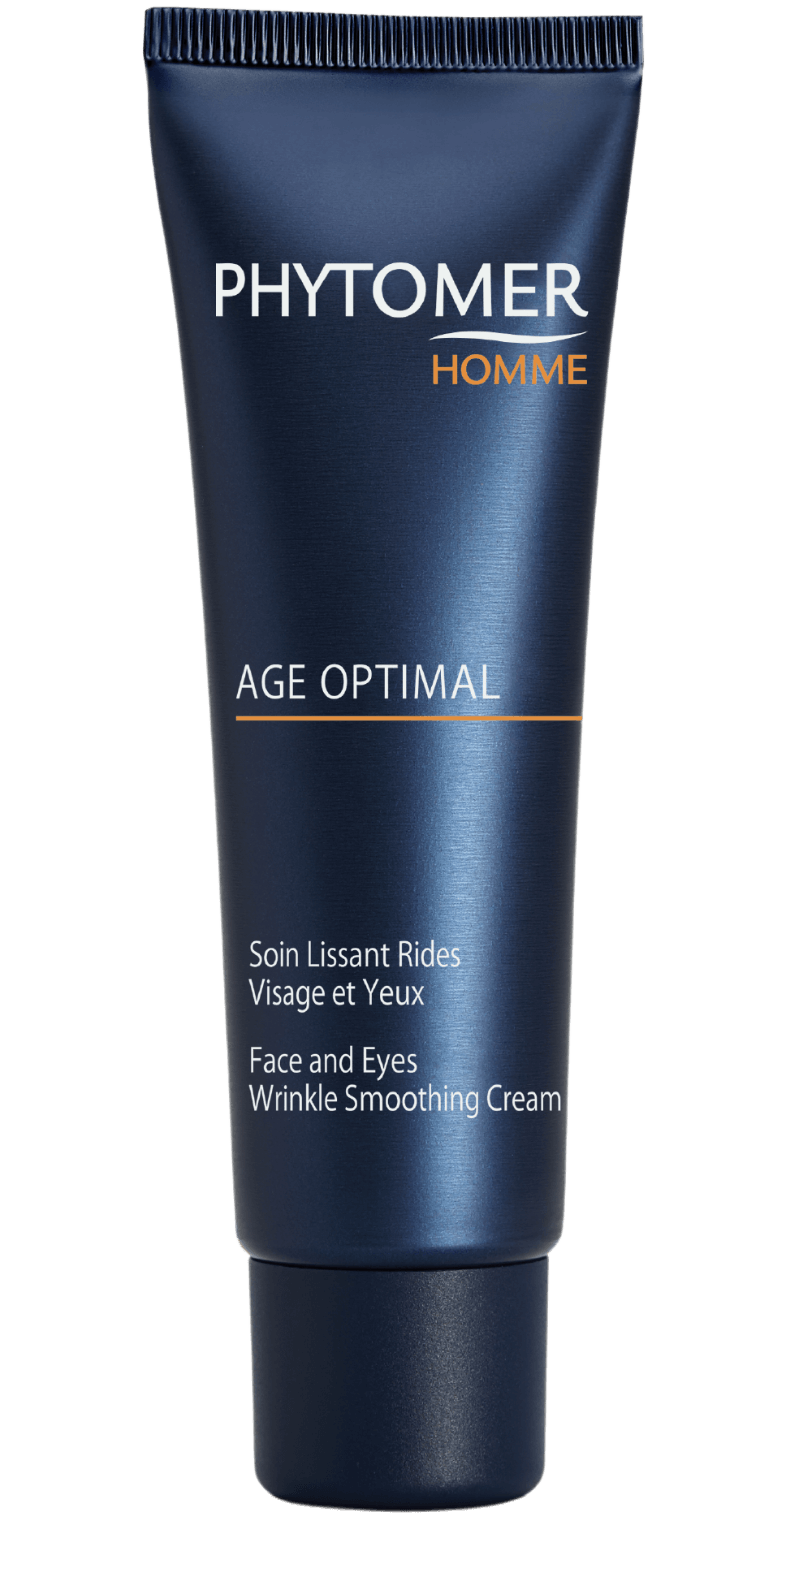 &#39;s Phytomer AGE OPTIMALFace and Eyes Wrinkle Smoothing Cream - Bellini&#39;s Skin and Parfumerie 